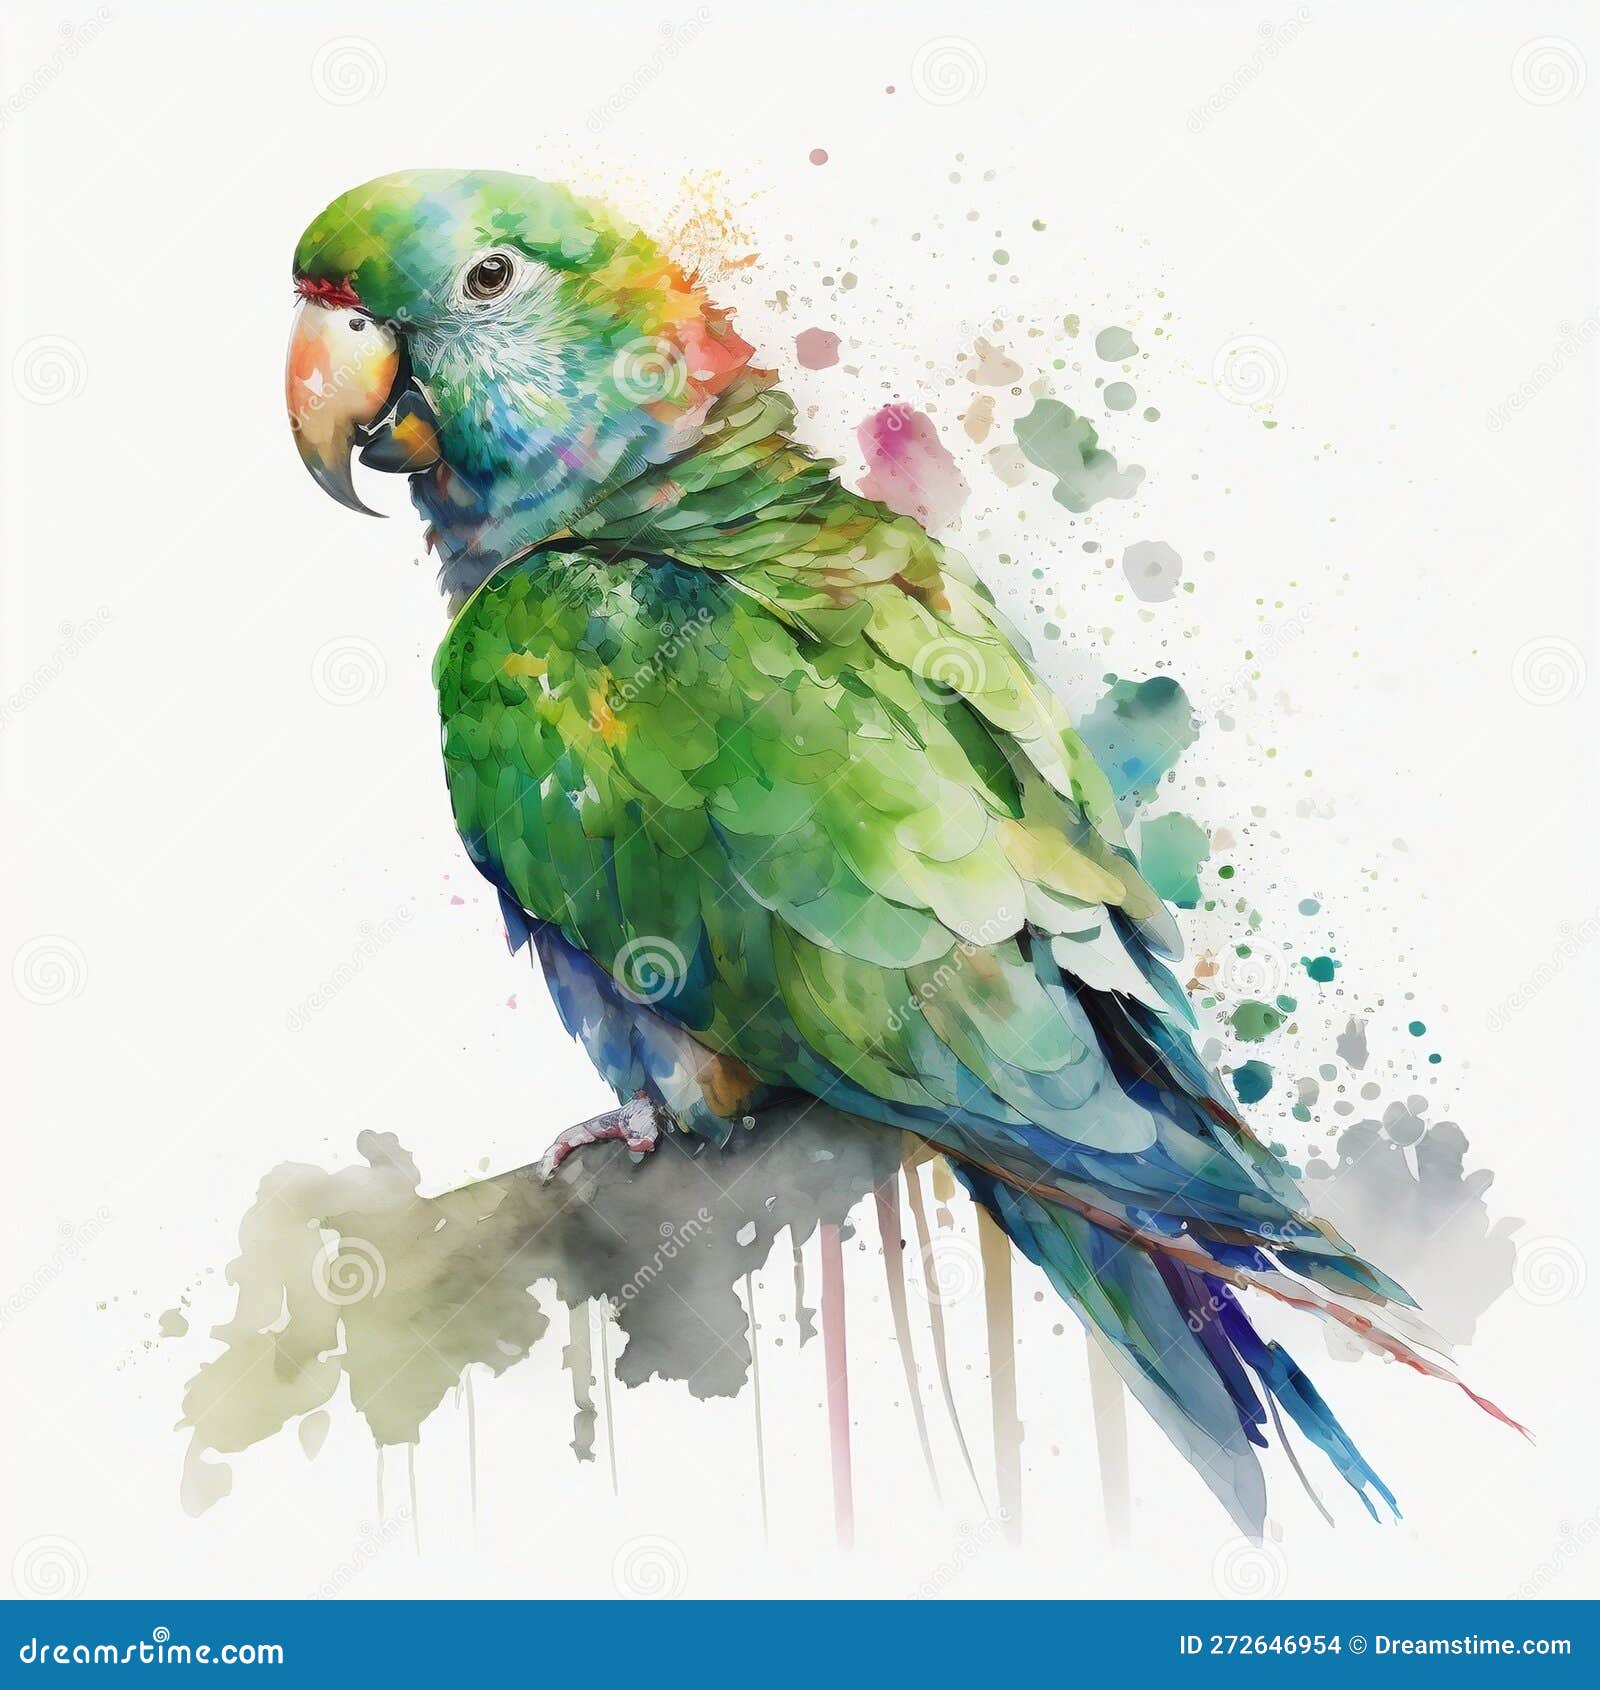 Watercolor Parrot Portrait Painted Illustration Of A Cute Bird On A